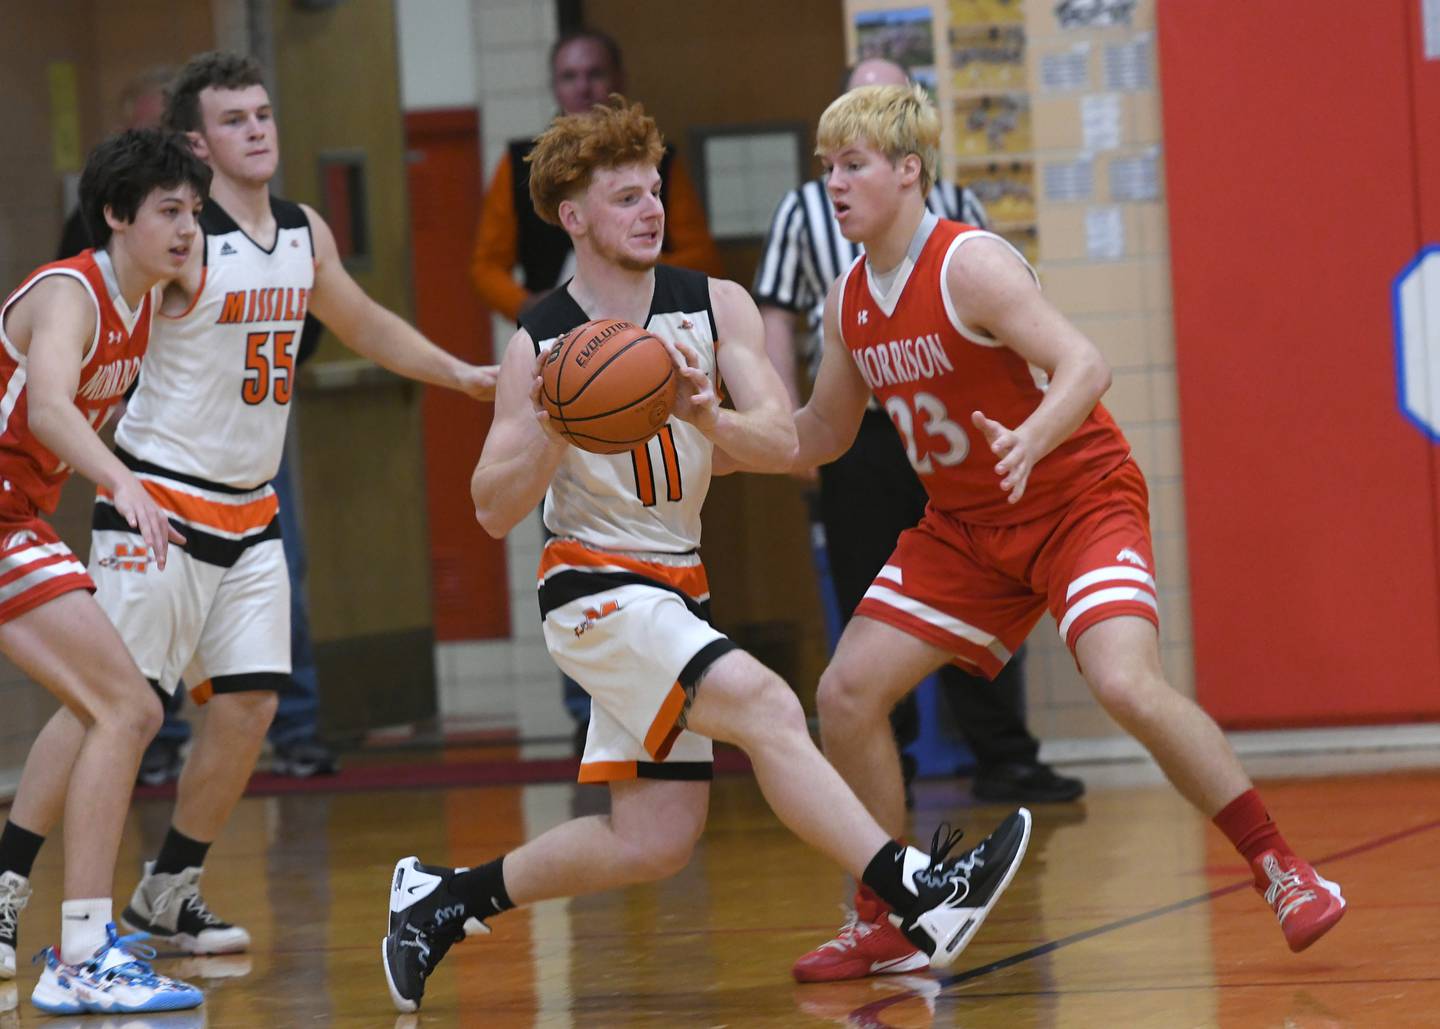 Milledgeville's Connor Nye makes a pass as Morrison's Carson Strating defends during Friday, Nov. 25 action at the Oregon Thanksgiving Tournament.